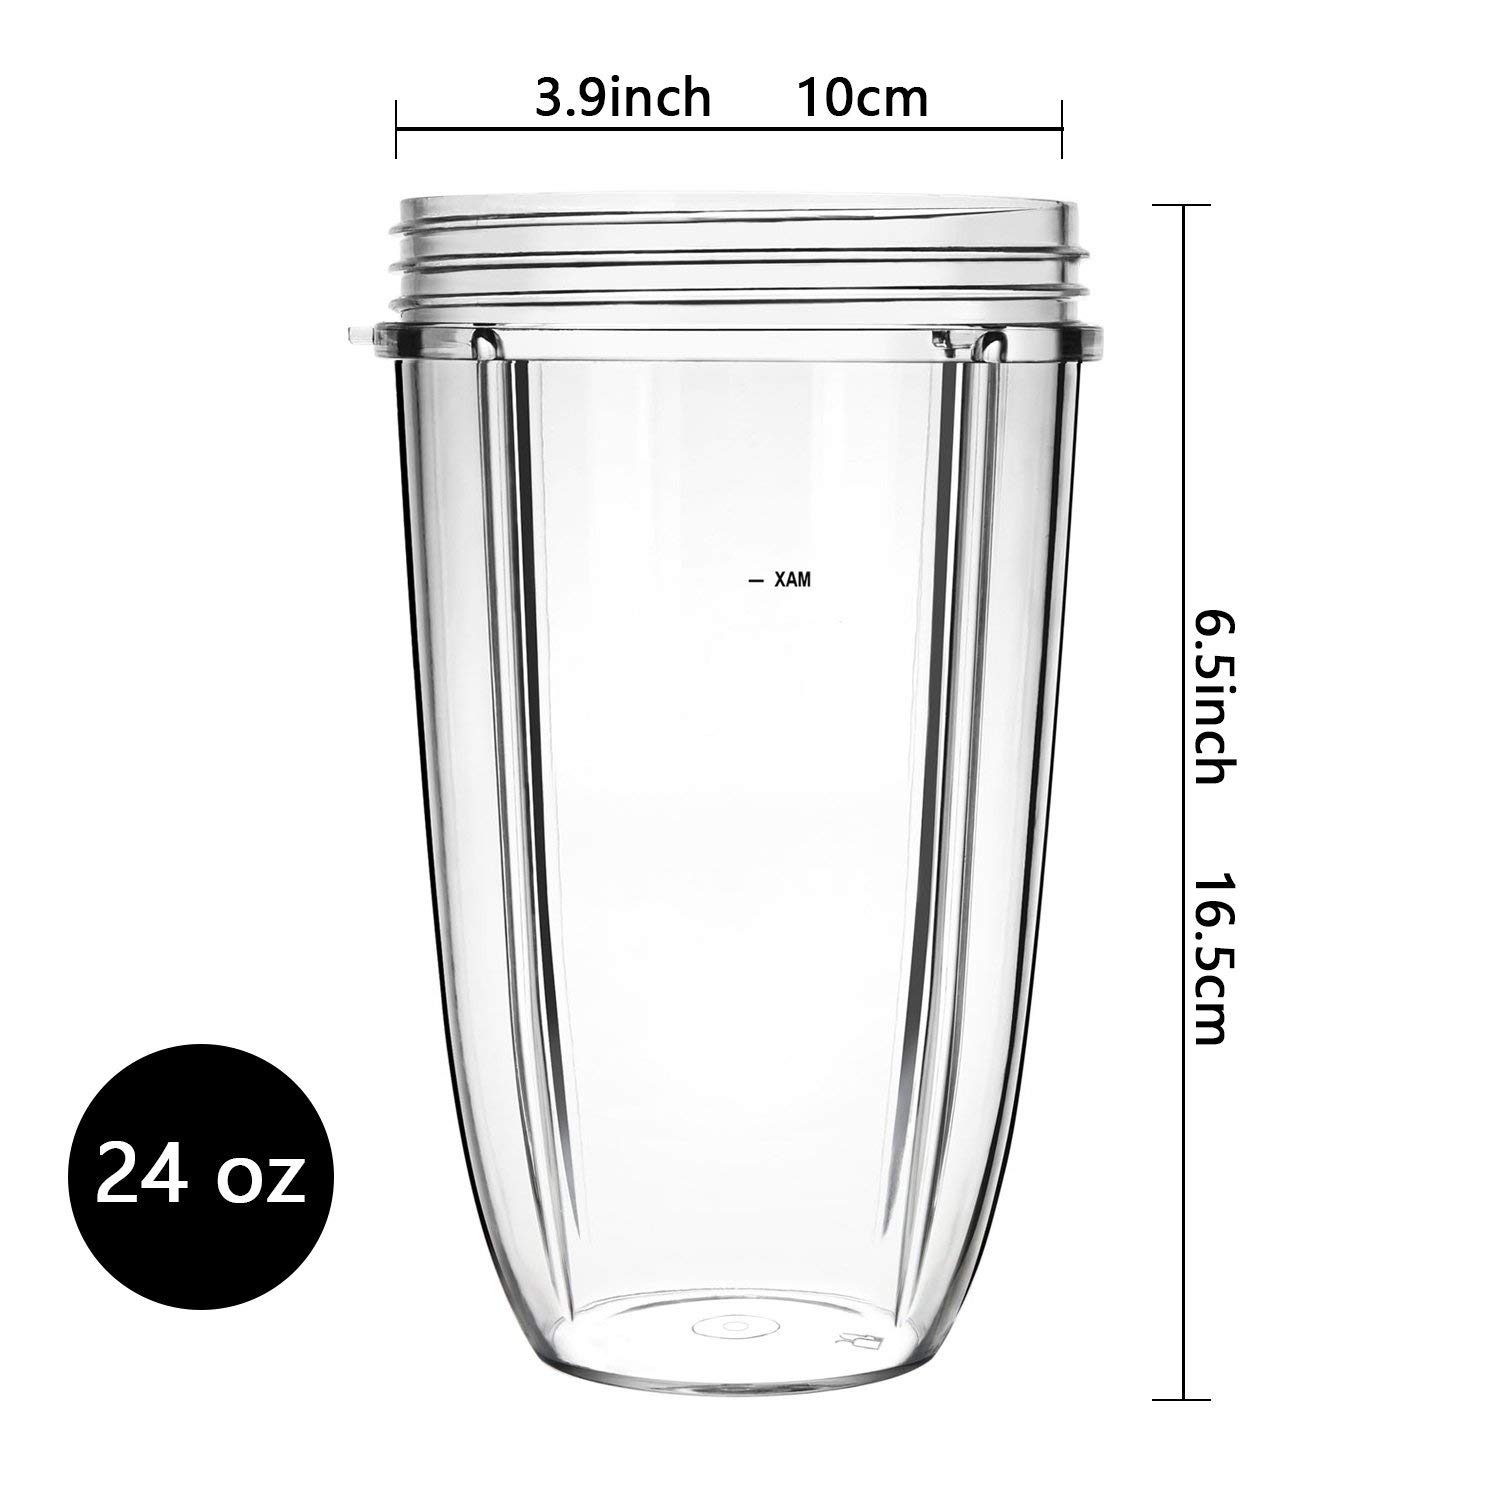 KingSaid 24oz Large Clear Cups Mugs Replacement Part Juicer Accessories For Nutribullet 600/900w Blender Juicer Mixer 